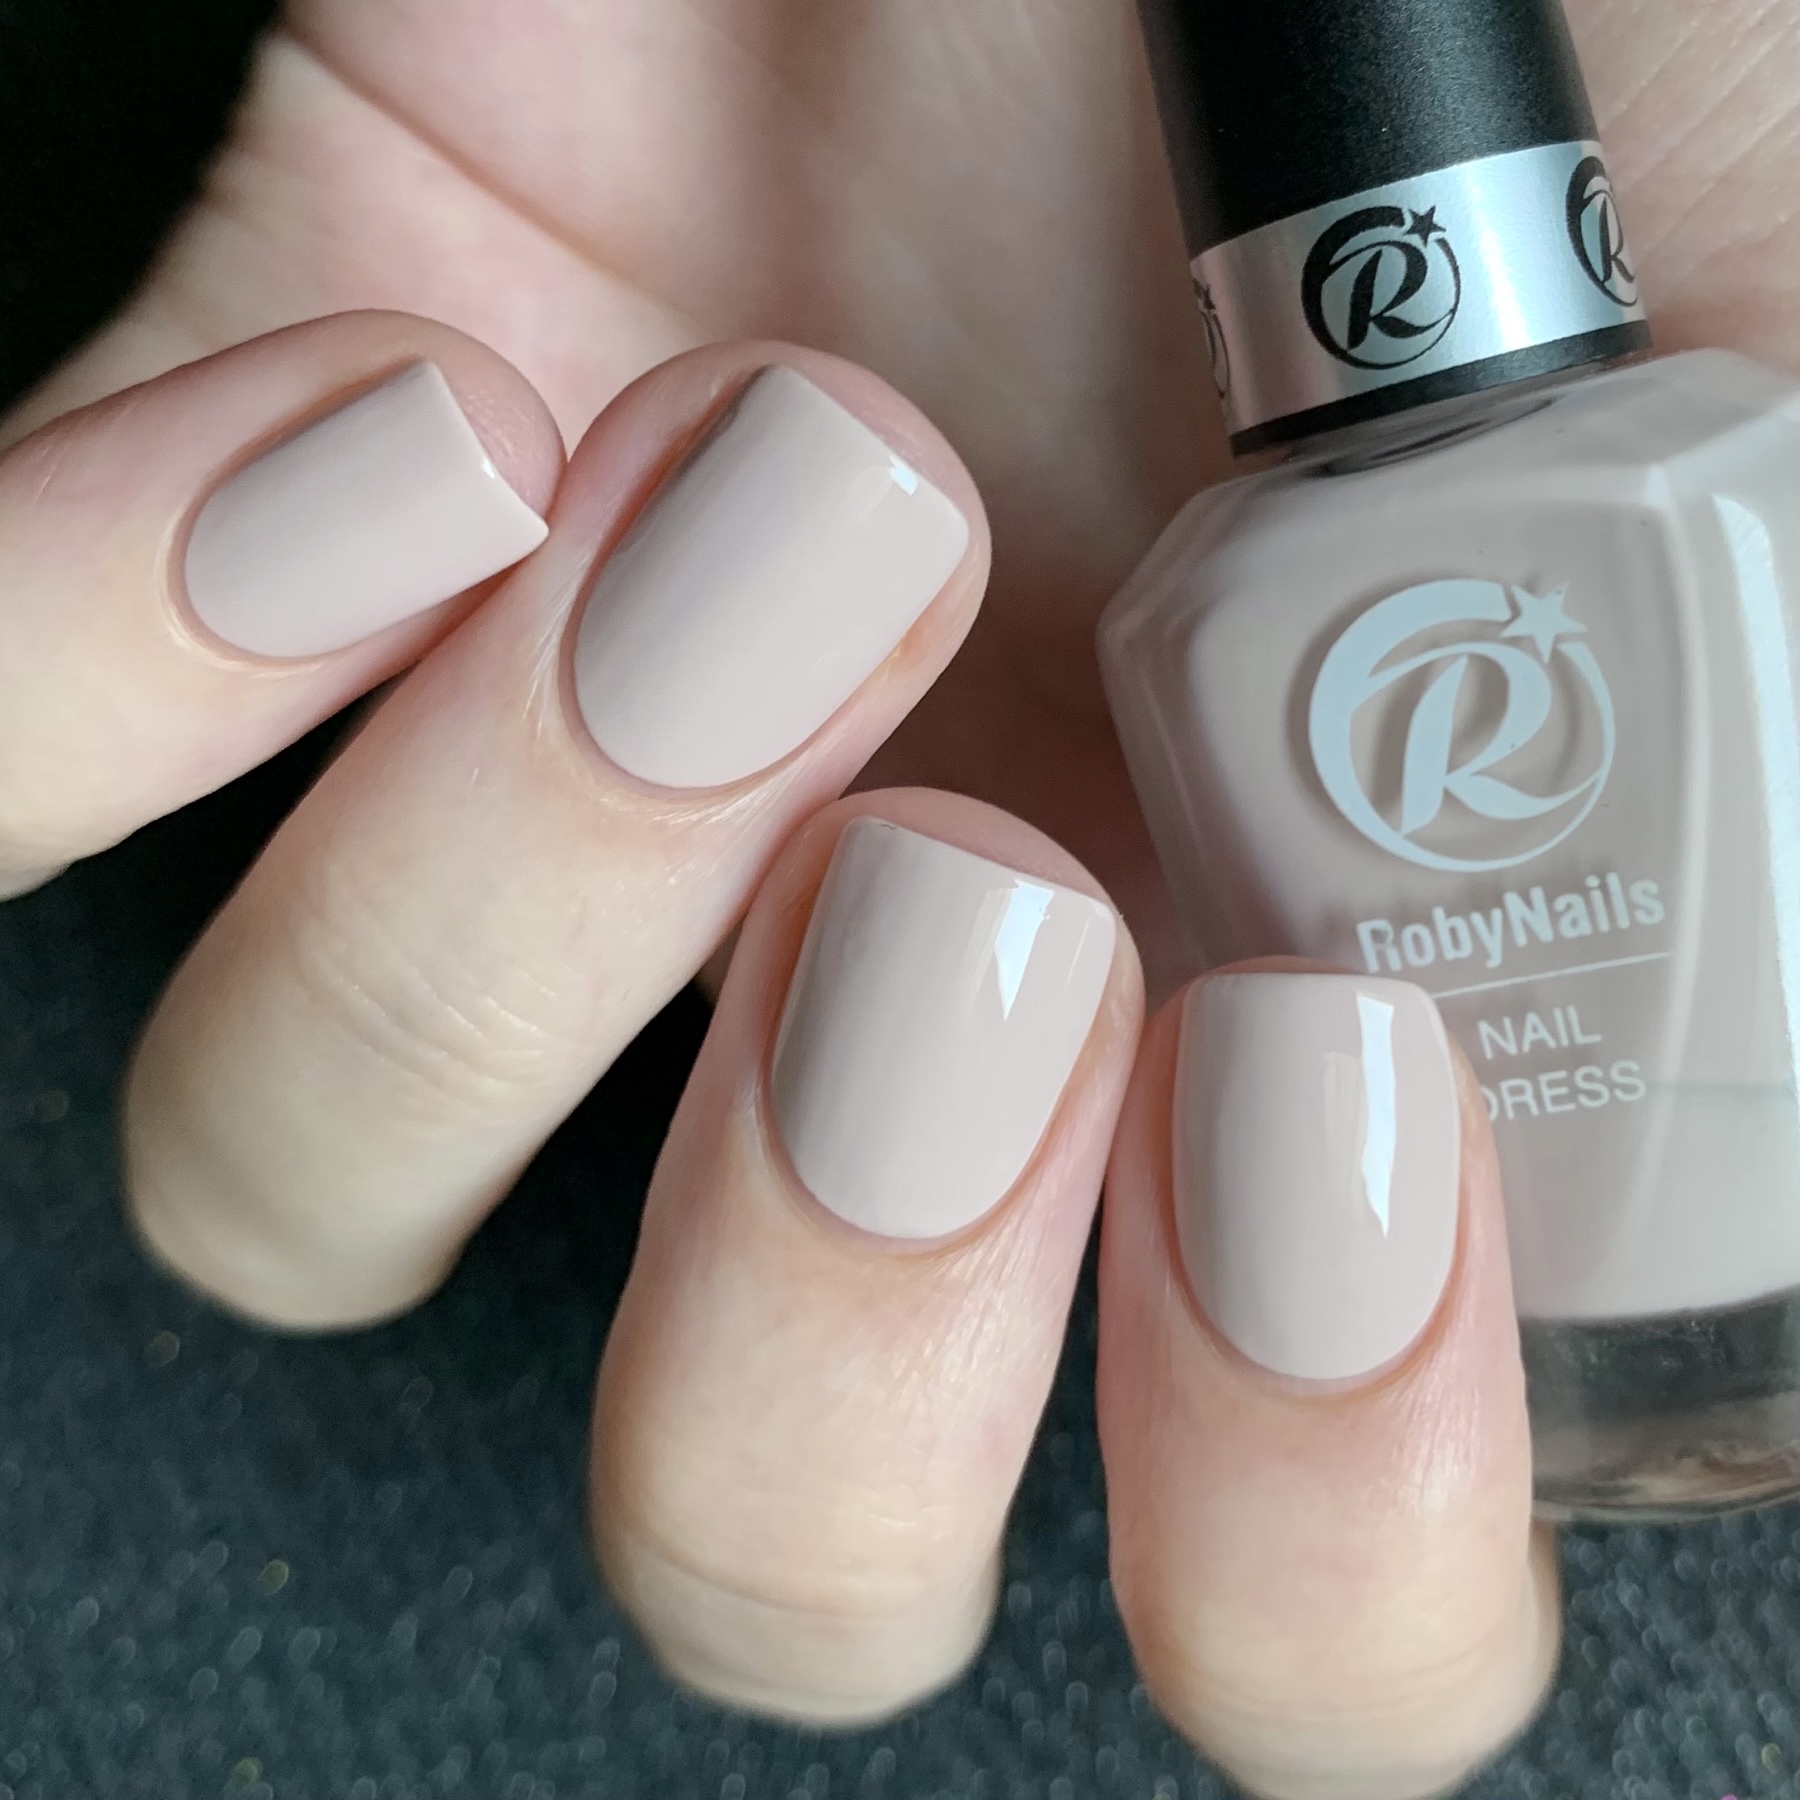 The Almond Milk Nail Trend is So Yummy | Lovely.asia